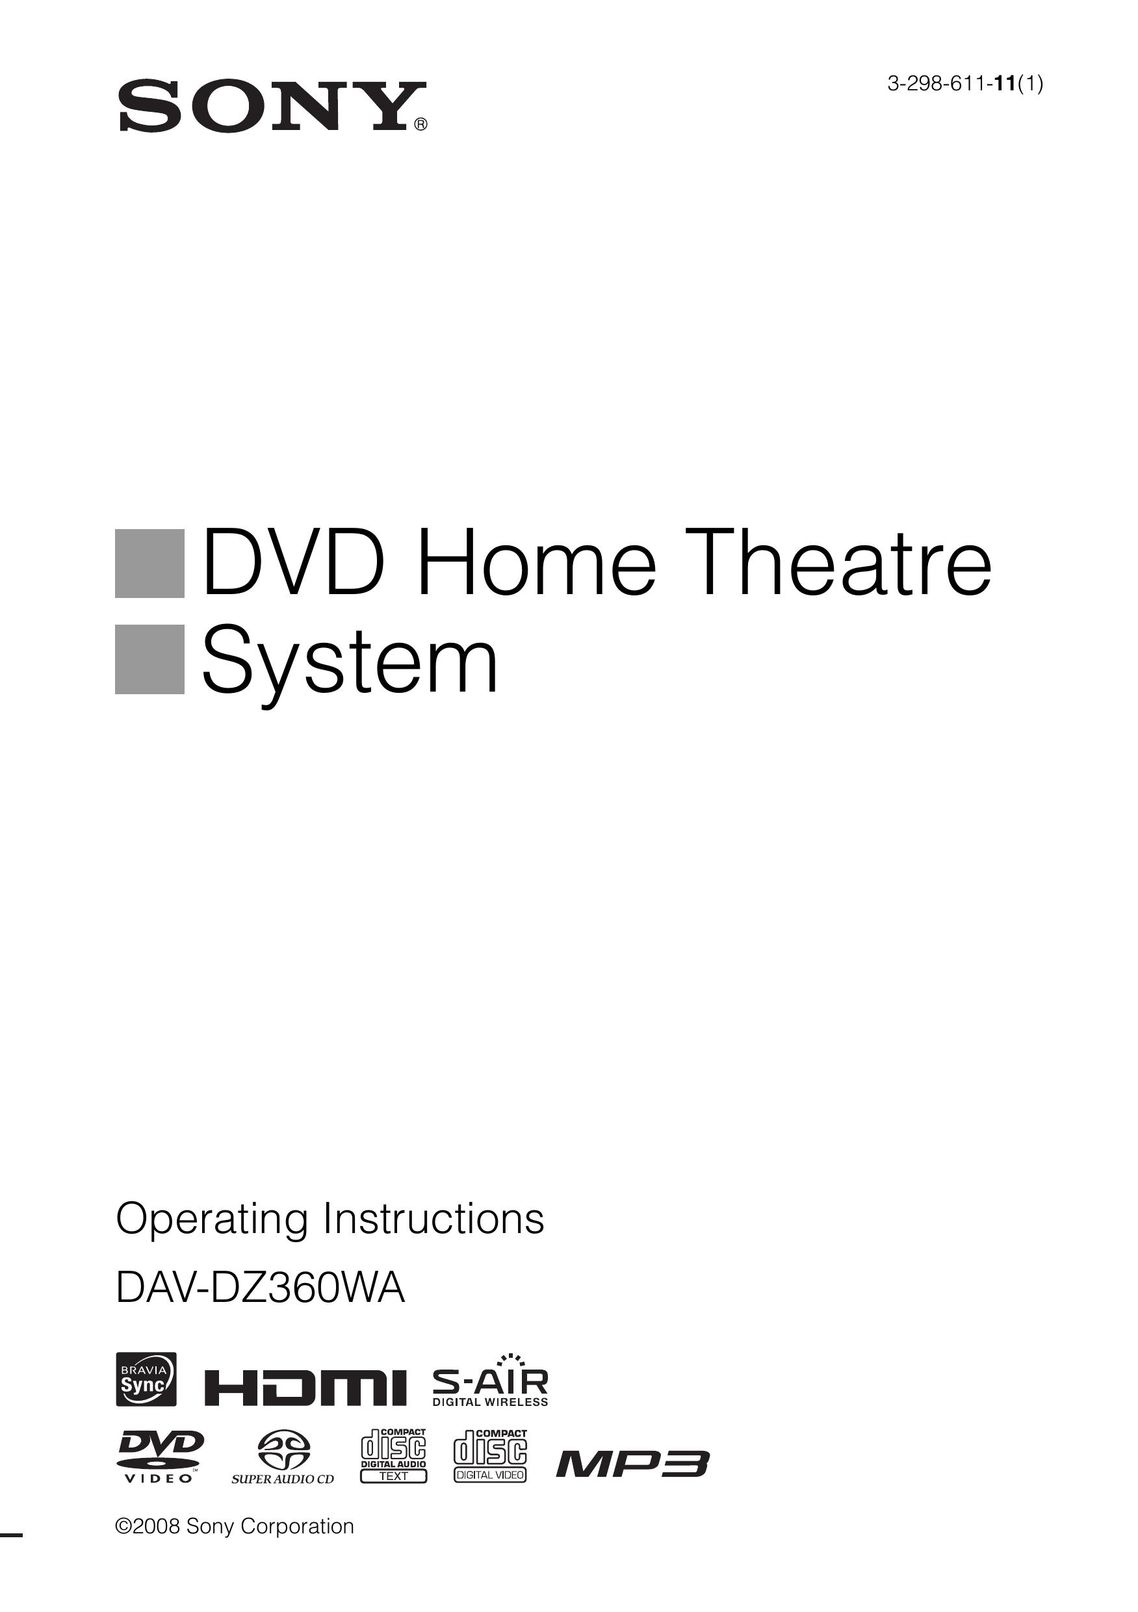 Sony 3-298-611-11(1) Home Theater System User Manual